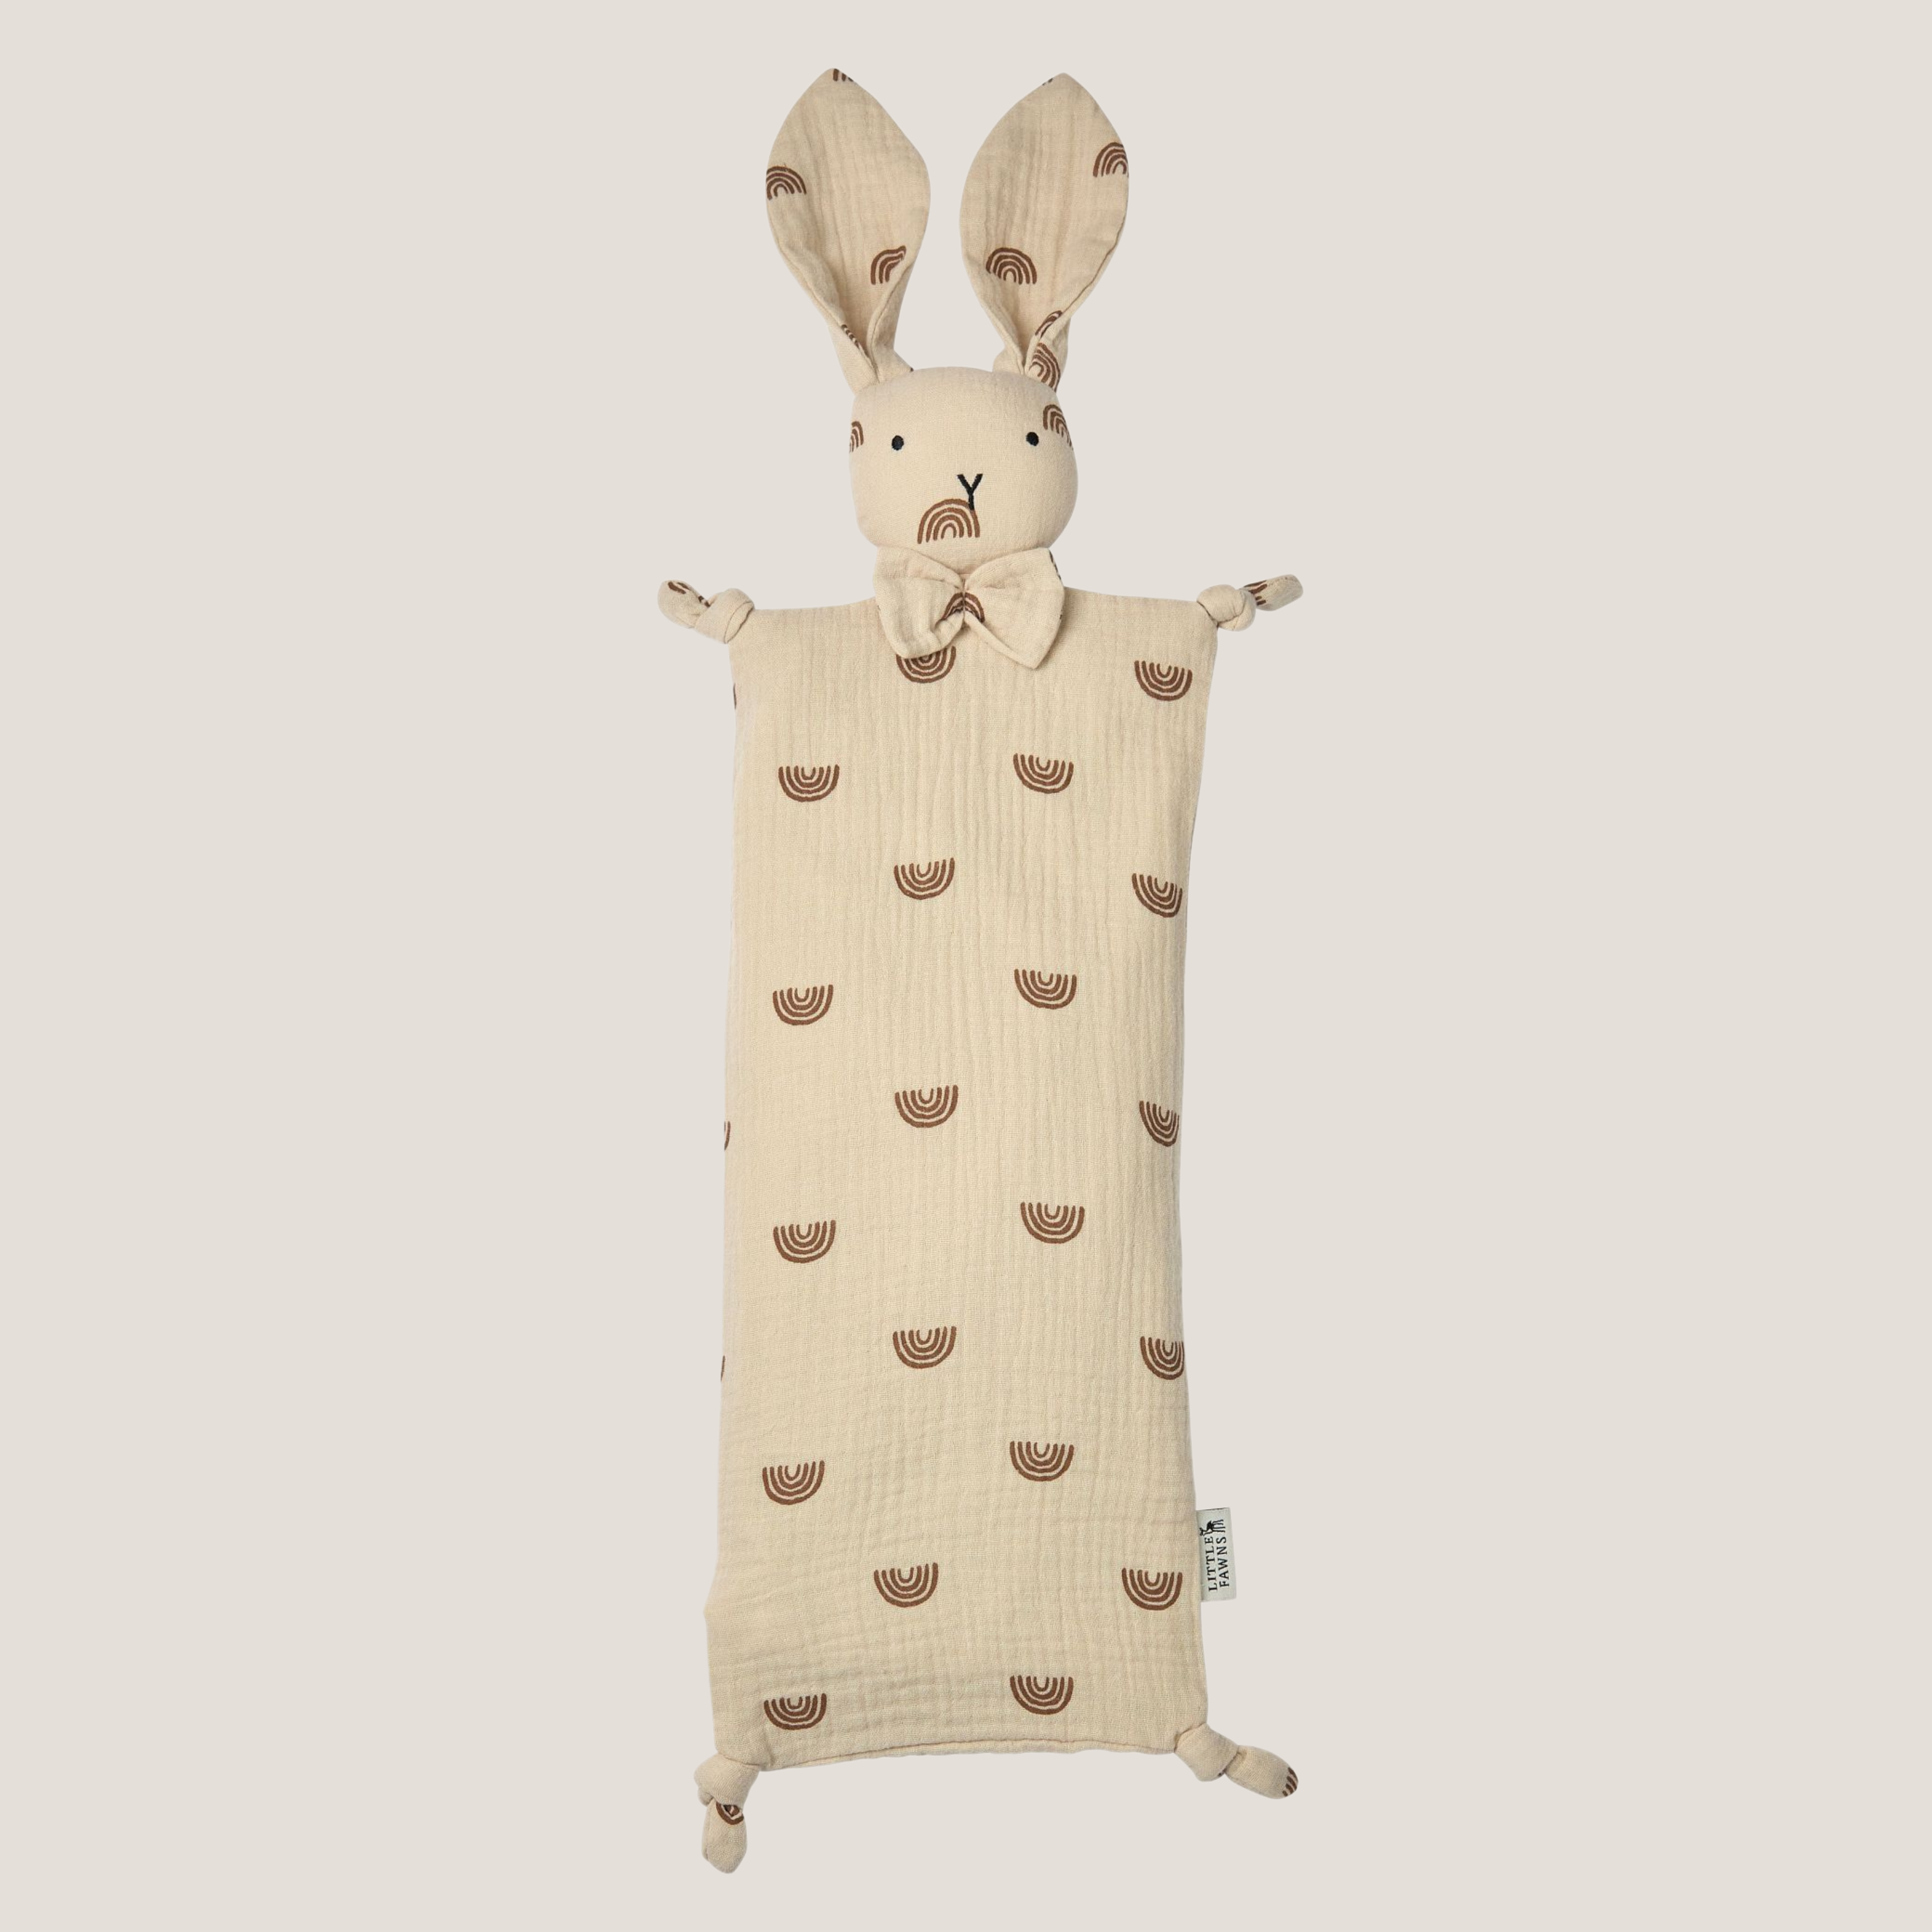 Snuggly Bunny Beansprout Husk Pillow in Ivory Beige Rainbow